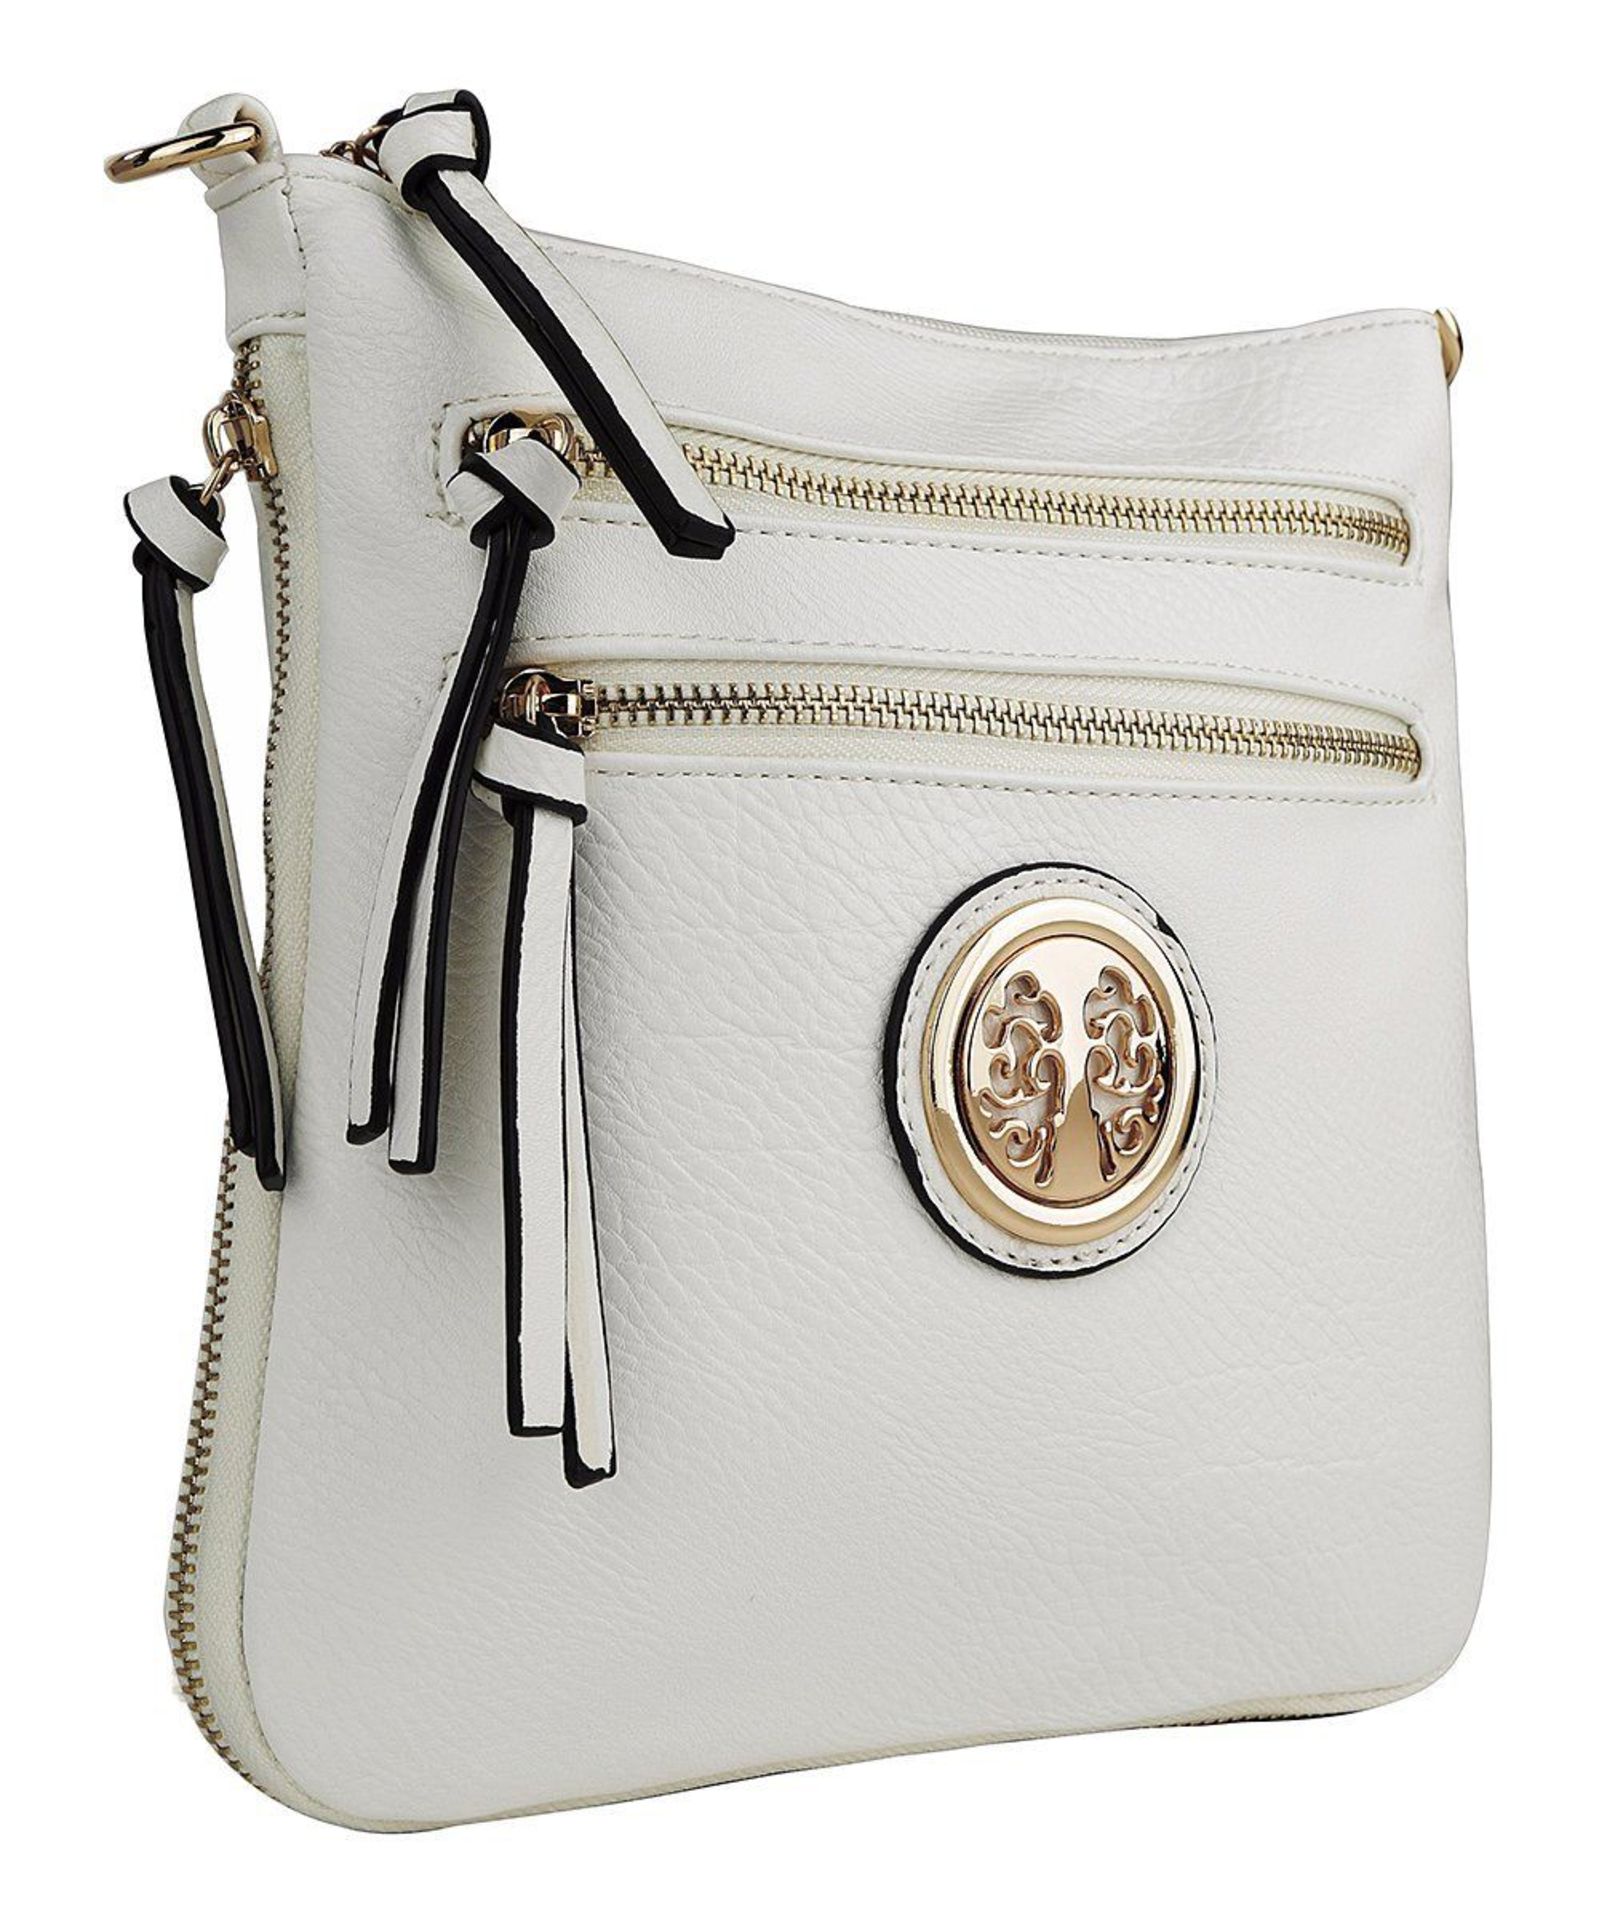 Mkf Collection By Mia K. Farrow White Medallion Expandable Crossbody Bag (New With Tags) [Ref: